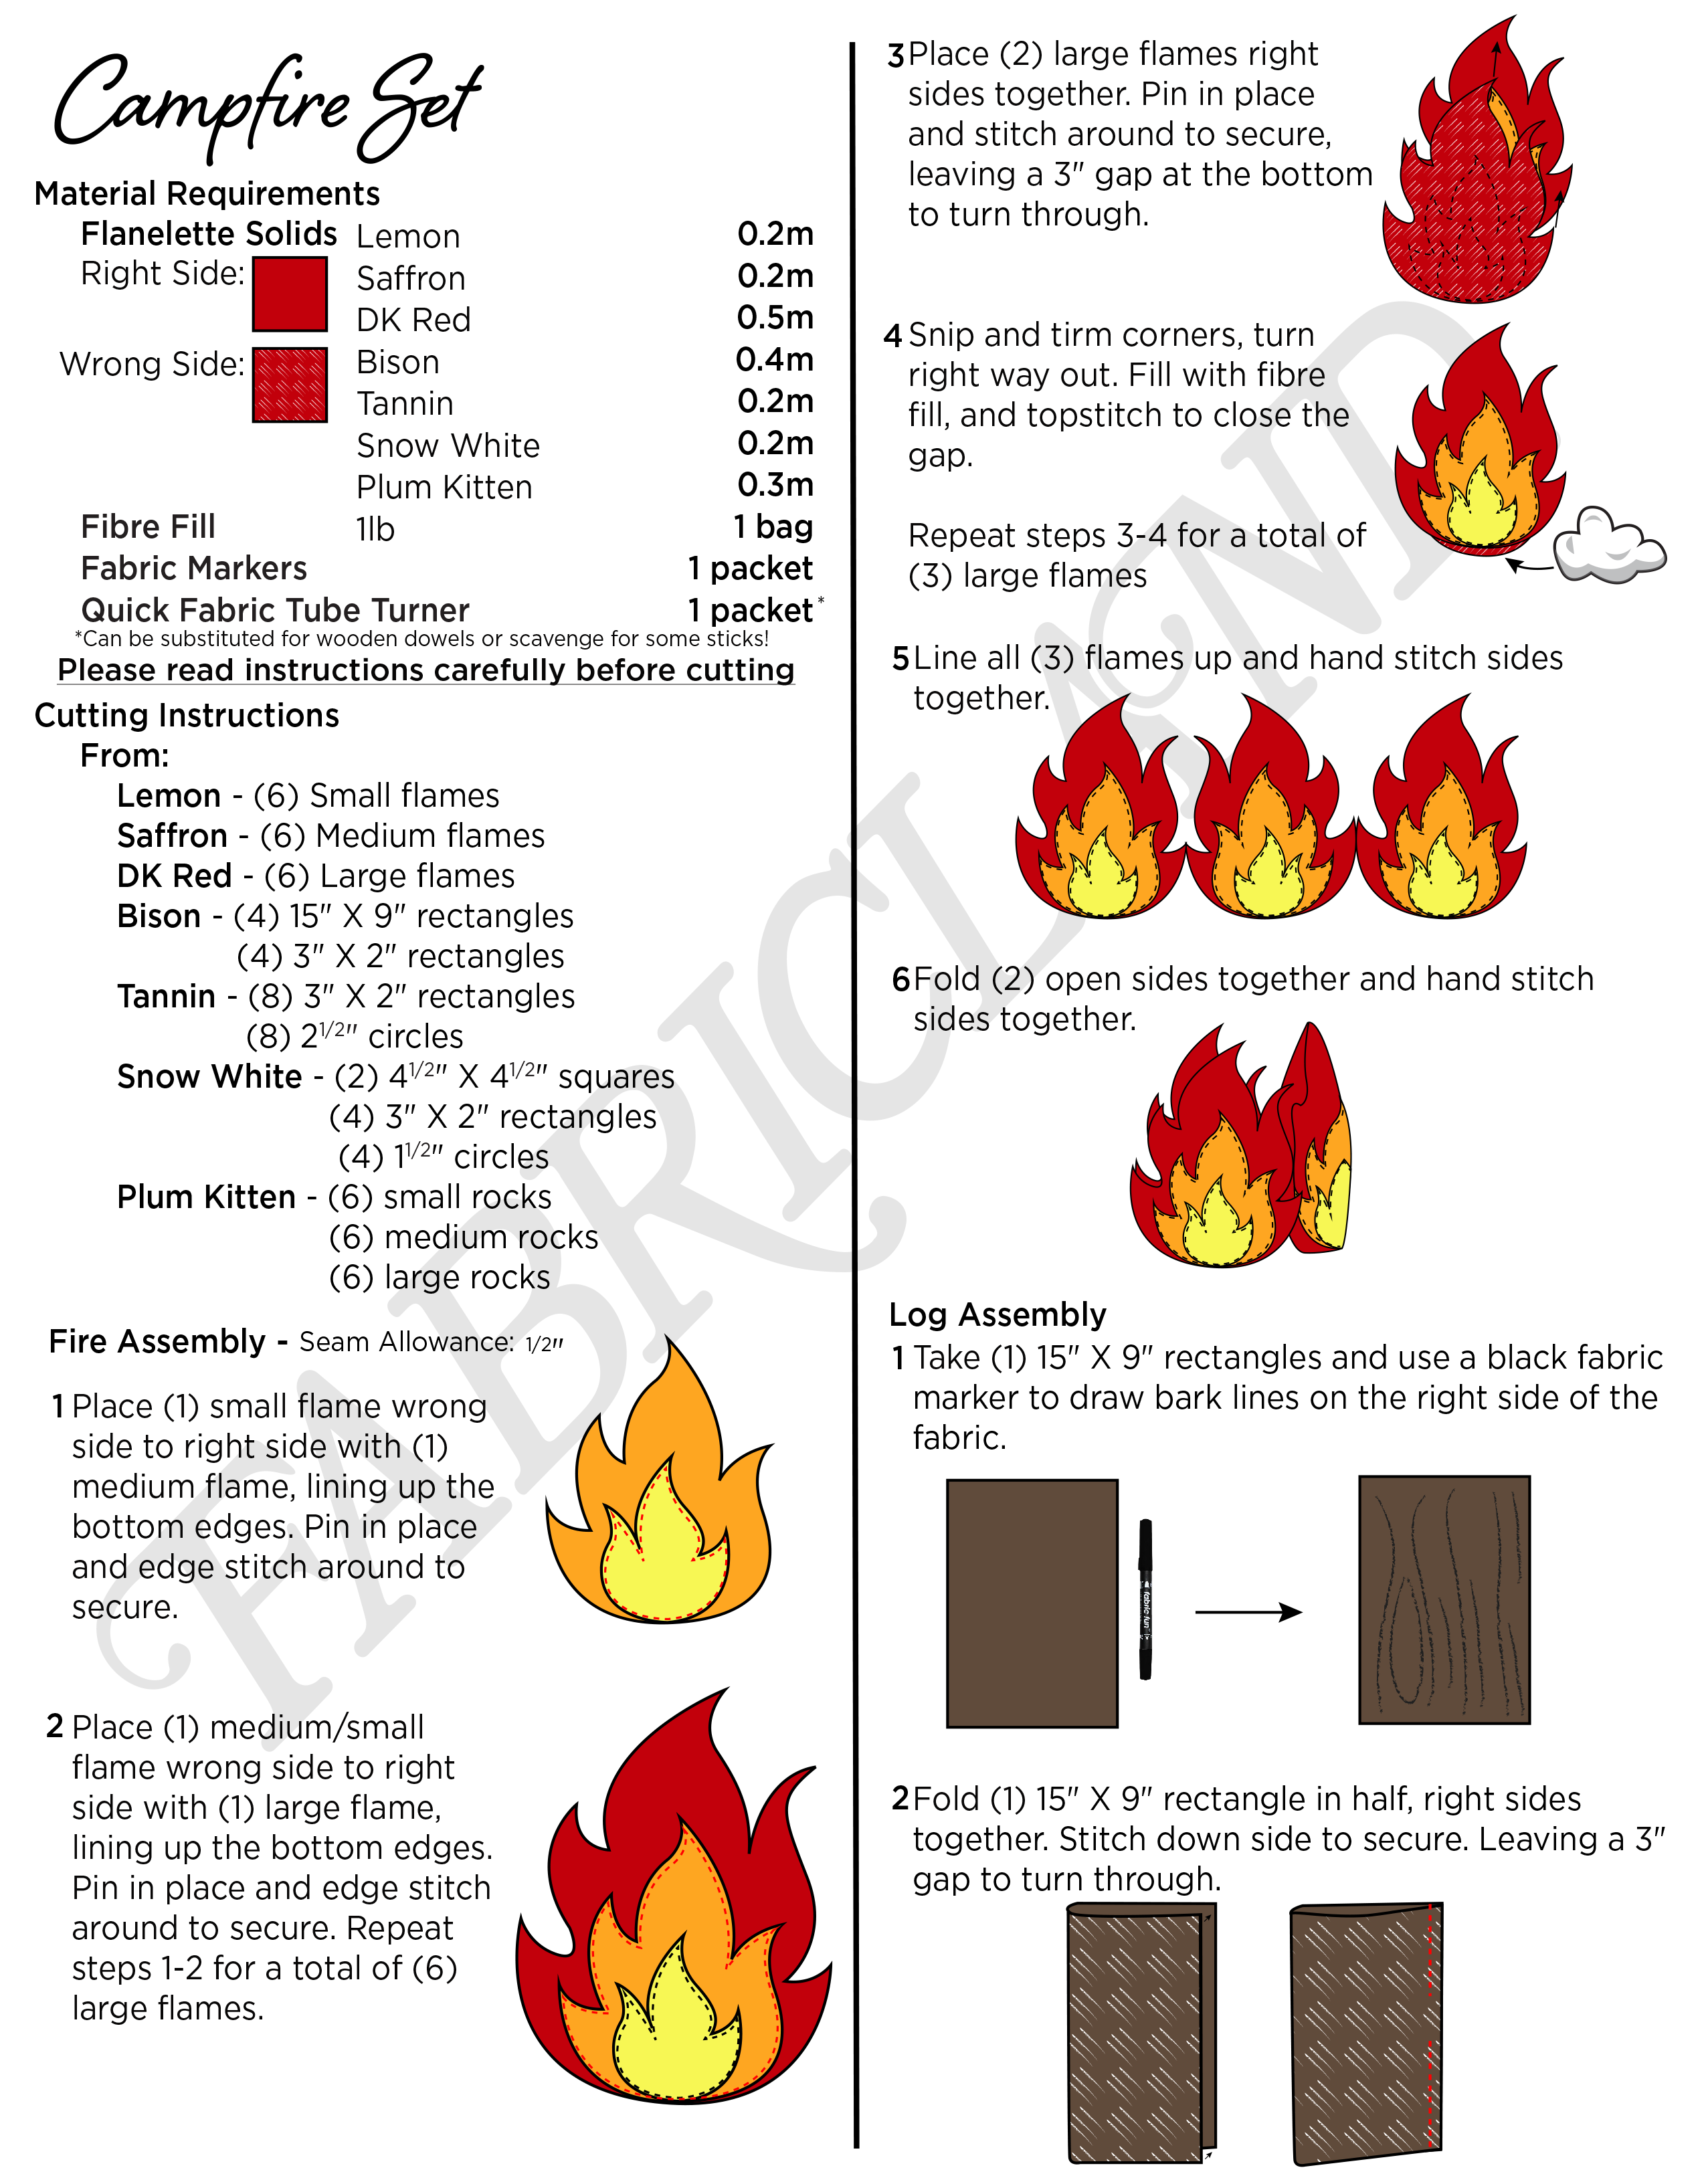 First set of steps to creating your own campfire craft